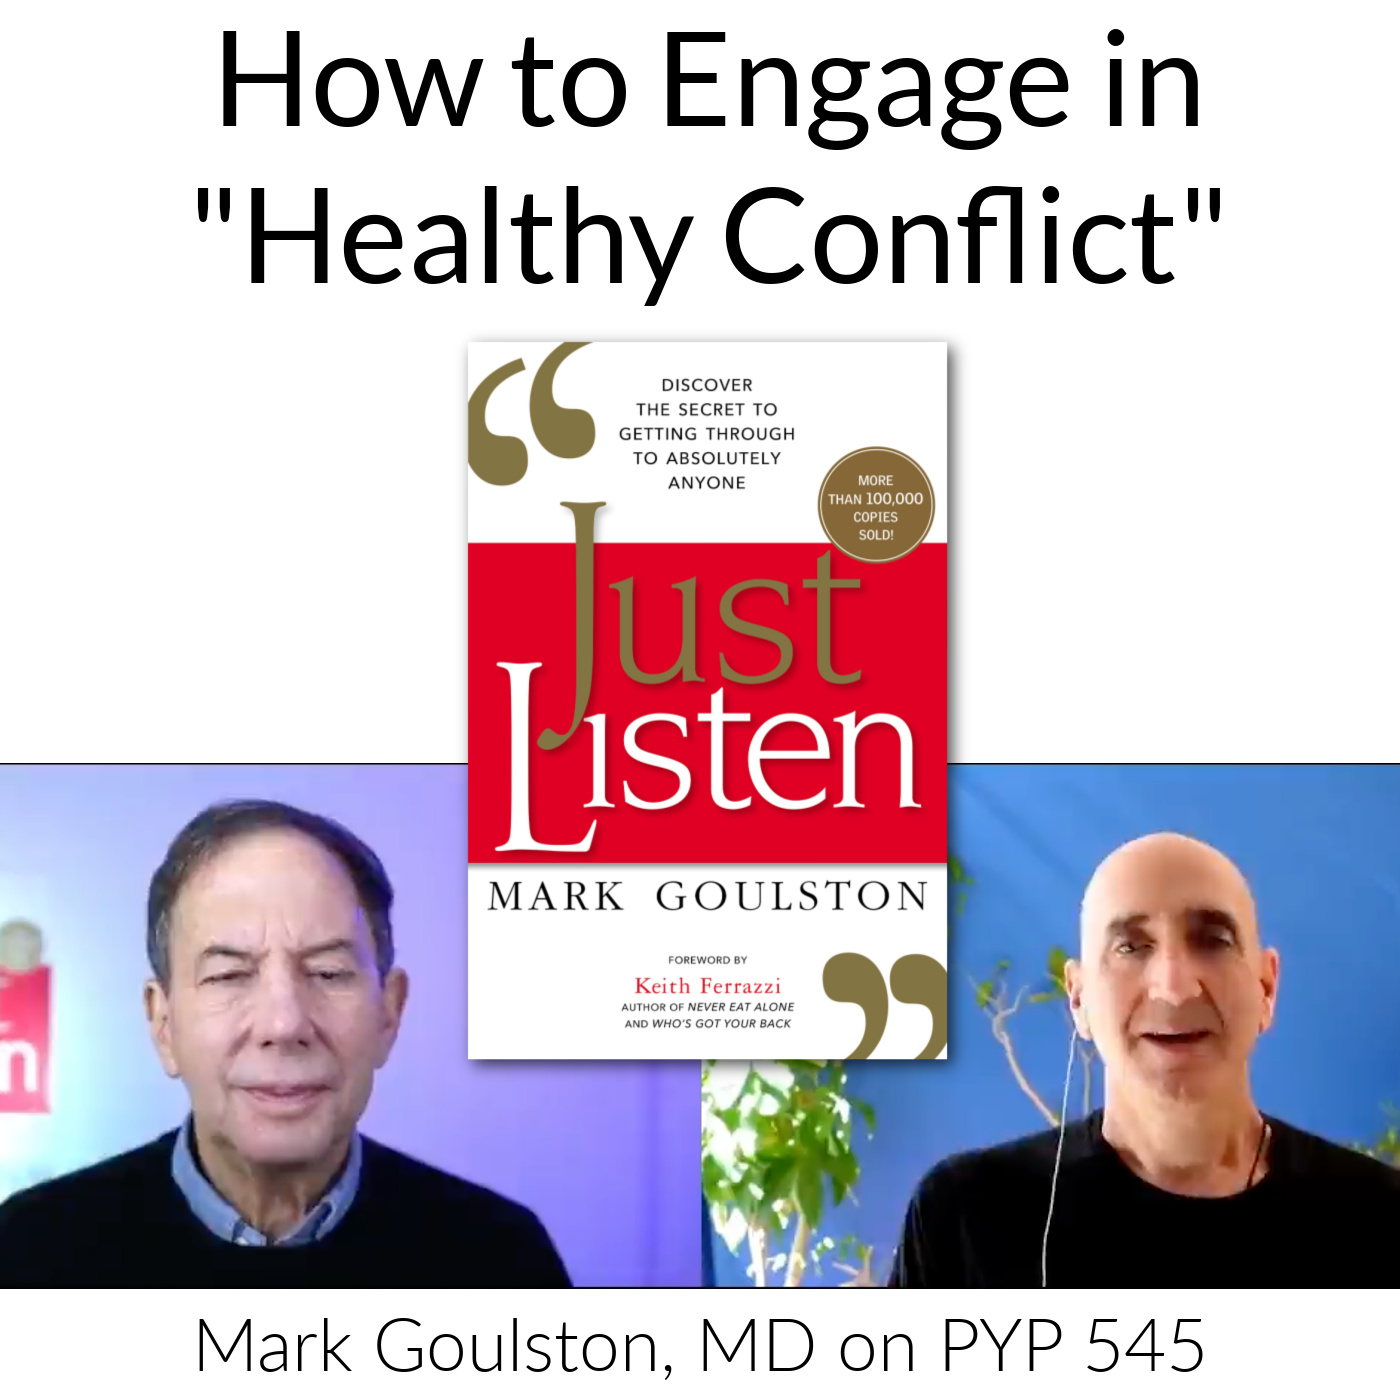 How to Engage in ”Healthy Conflict”: Mark Goulston, MD, on PYP 545